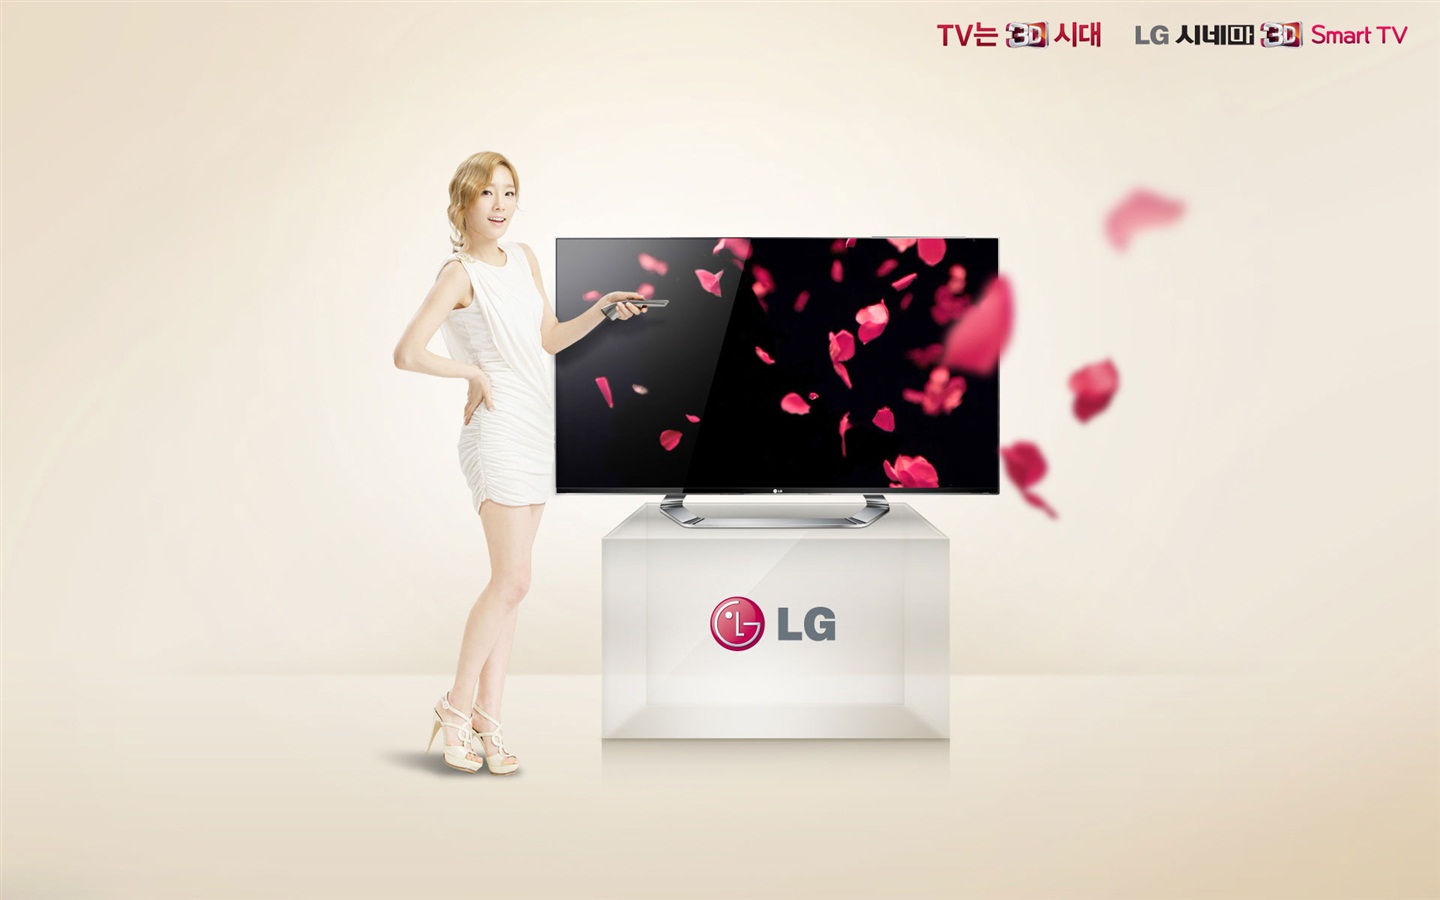 Girls Generation ACE and LG endorsements ads HD wallpapers #14 - 1440x900